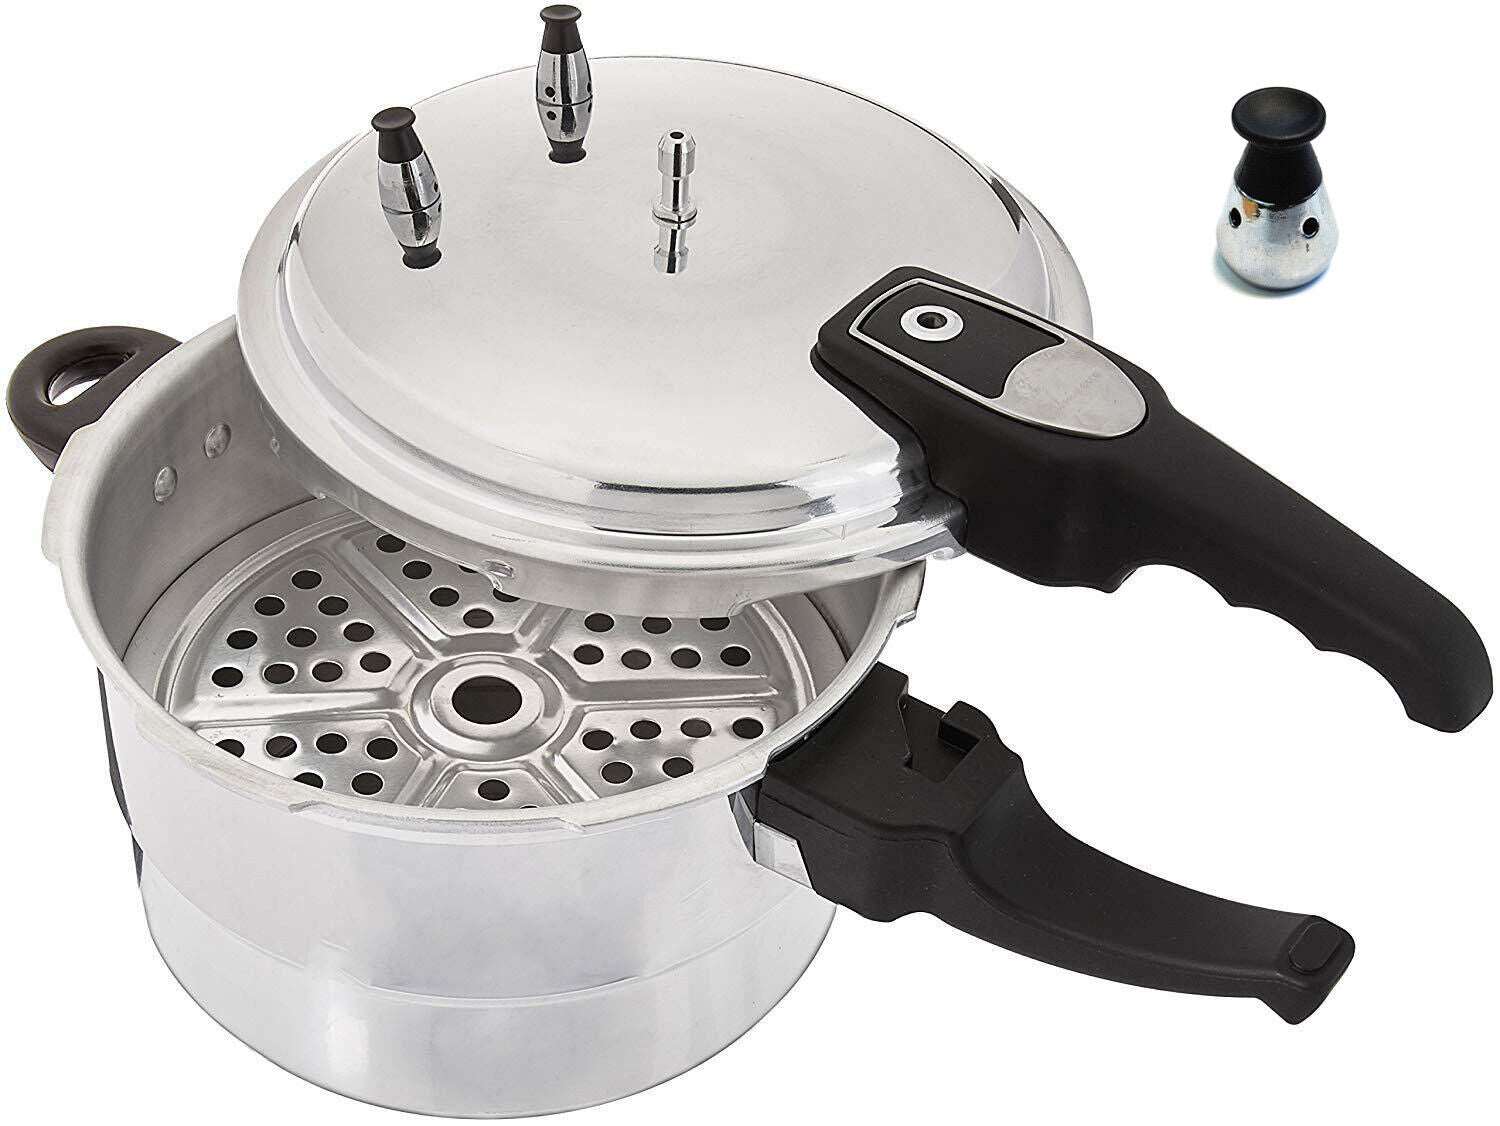 Aluminum Pressure Cooker With Steamer